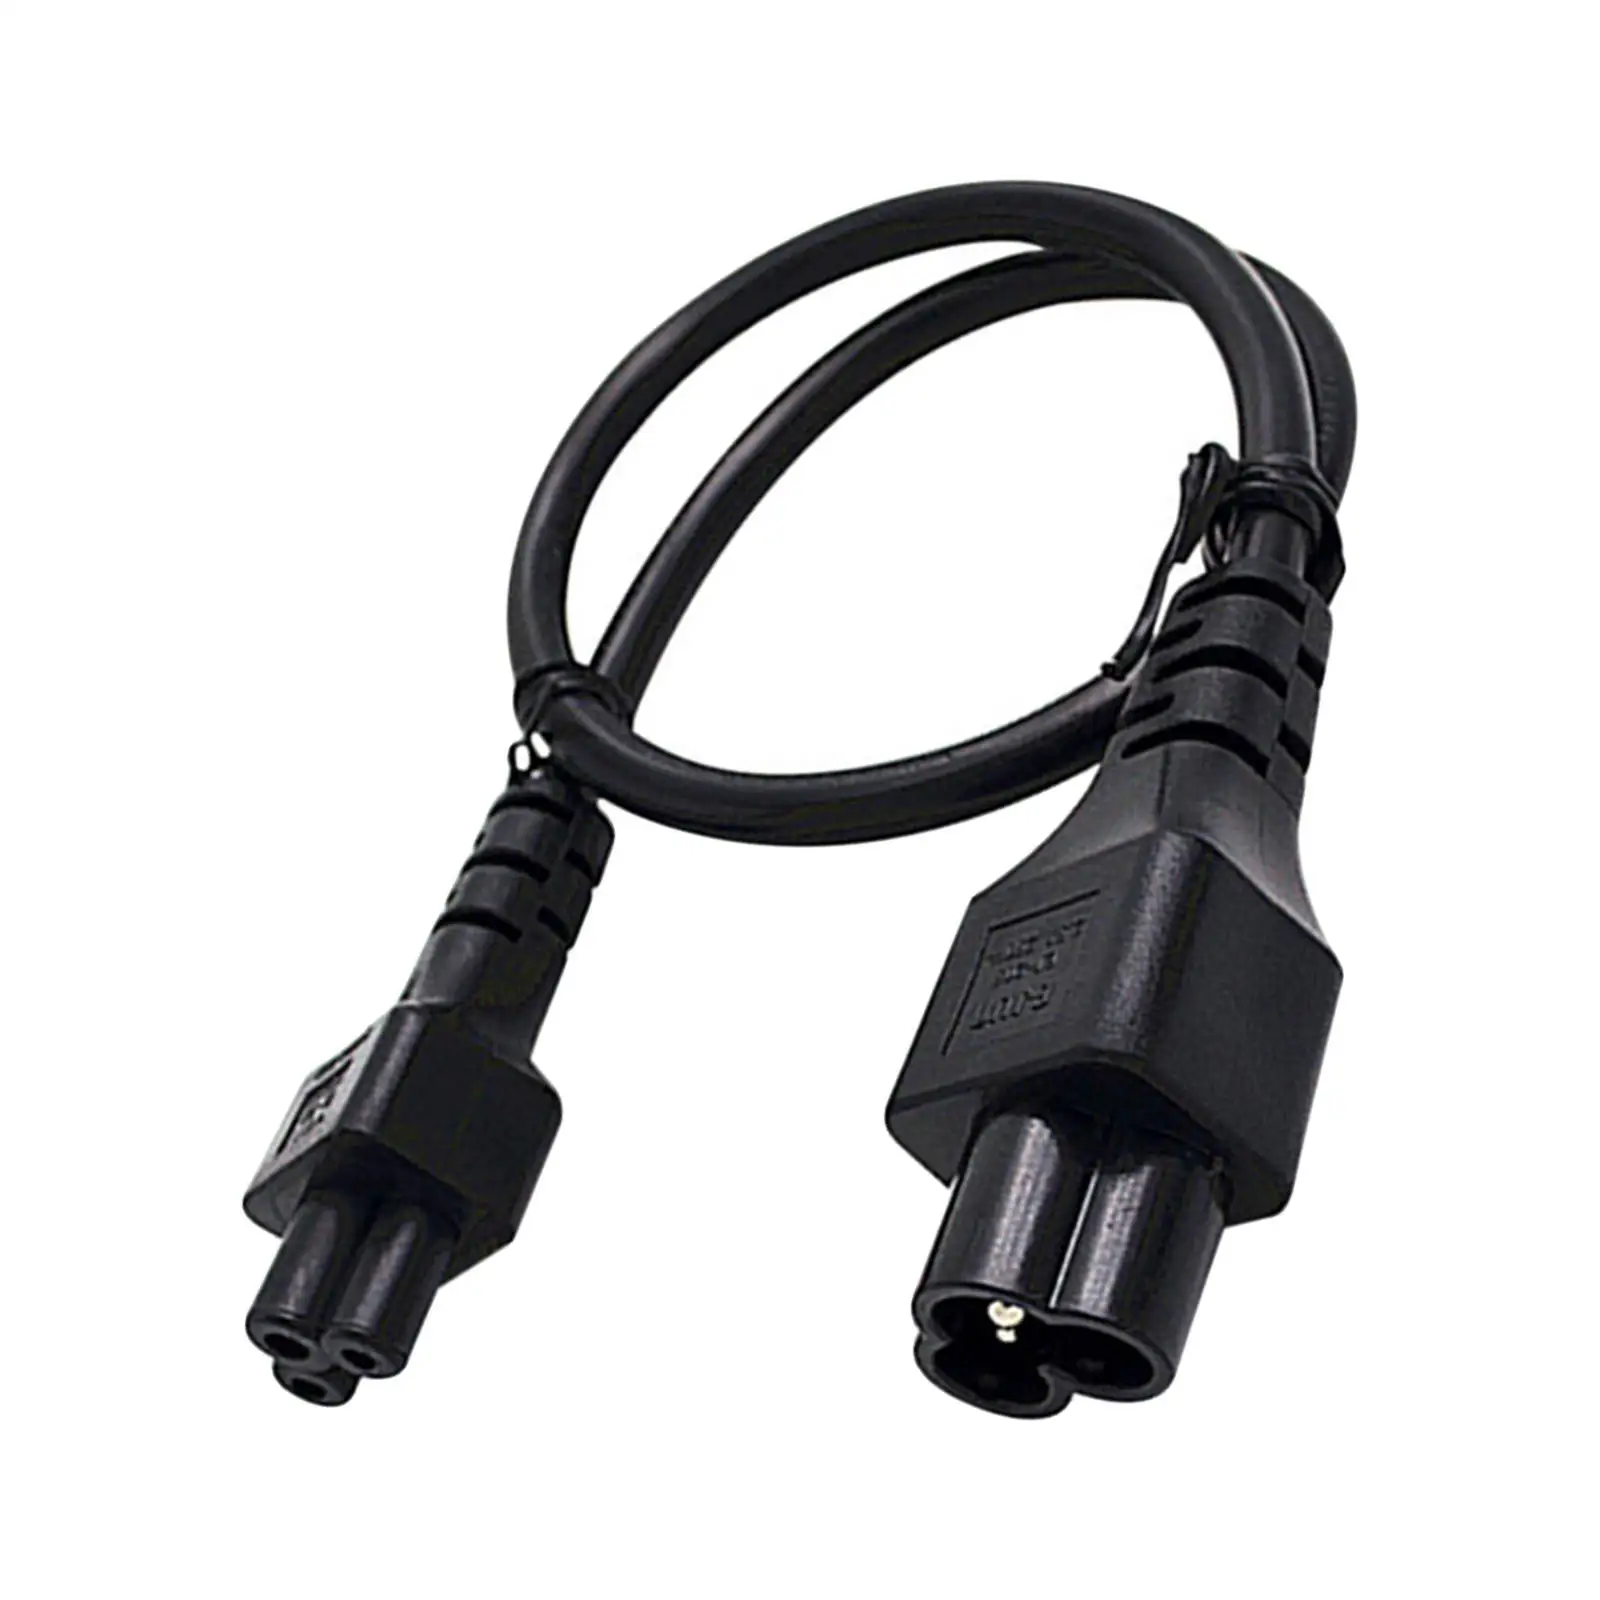 C6 to C5 PC Power Cord Cable Good Conductivity for Notebook Scanner Computer Laptop